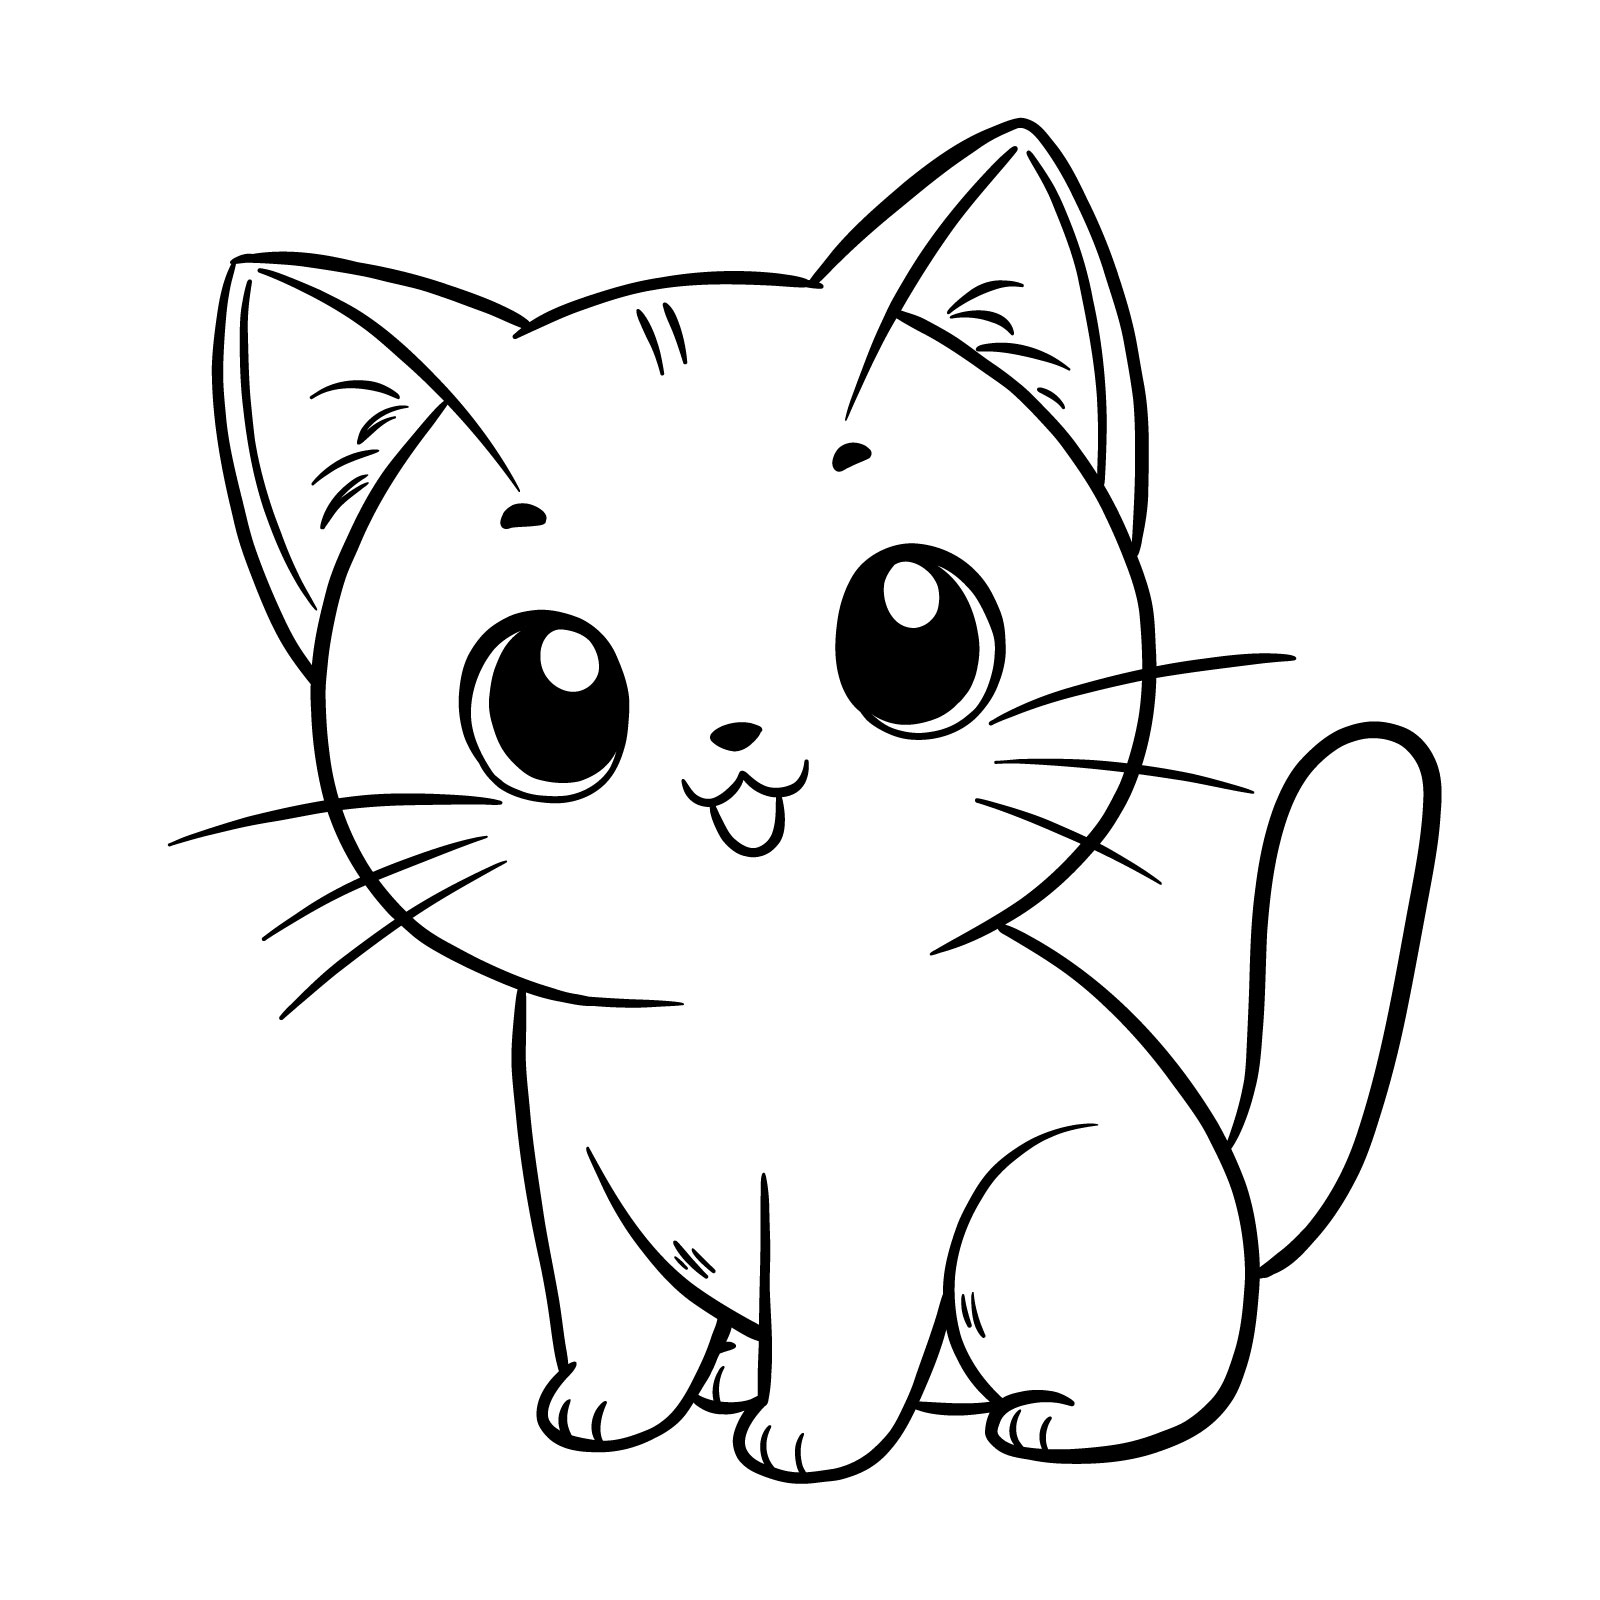 How to draw an anime cat - the result